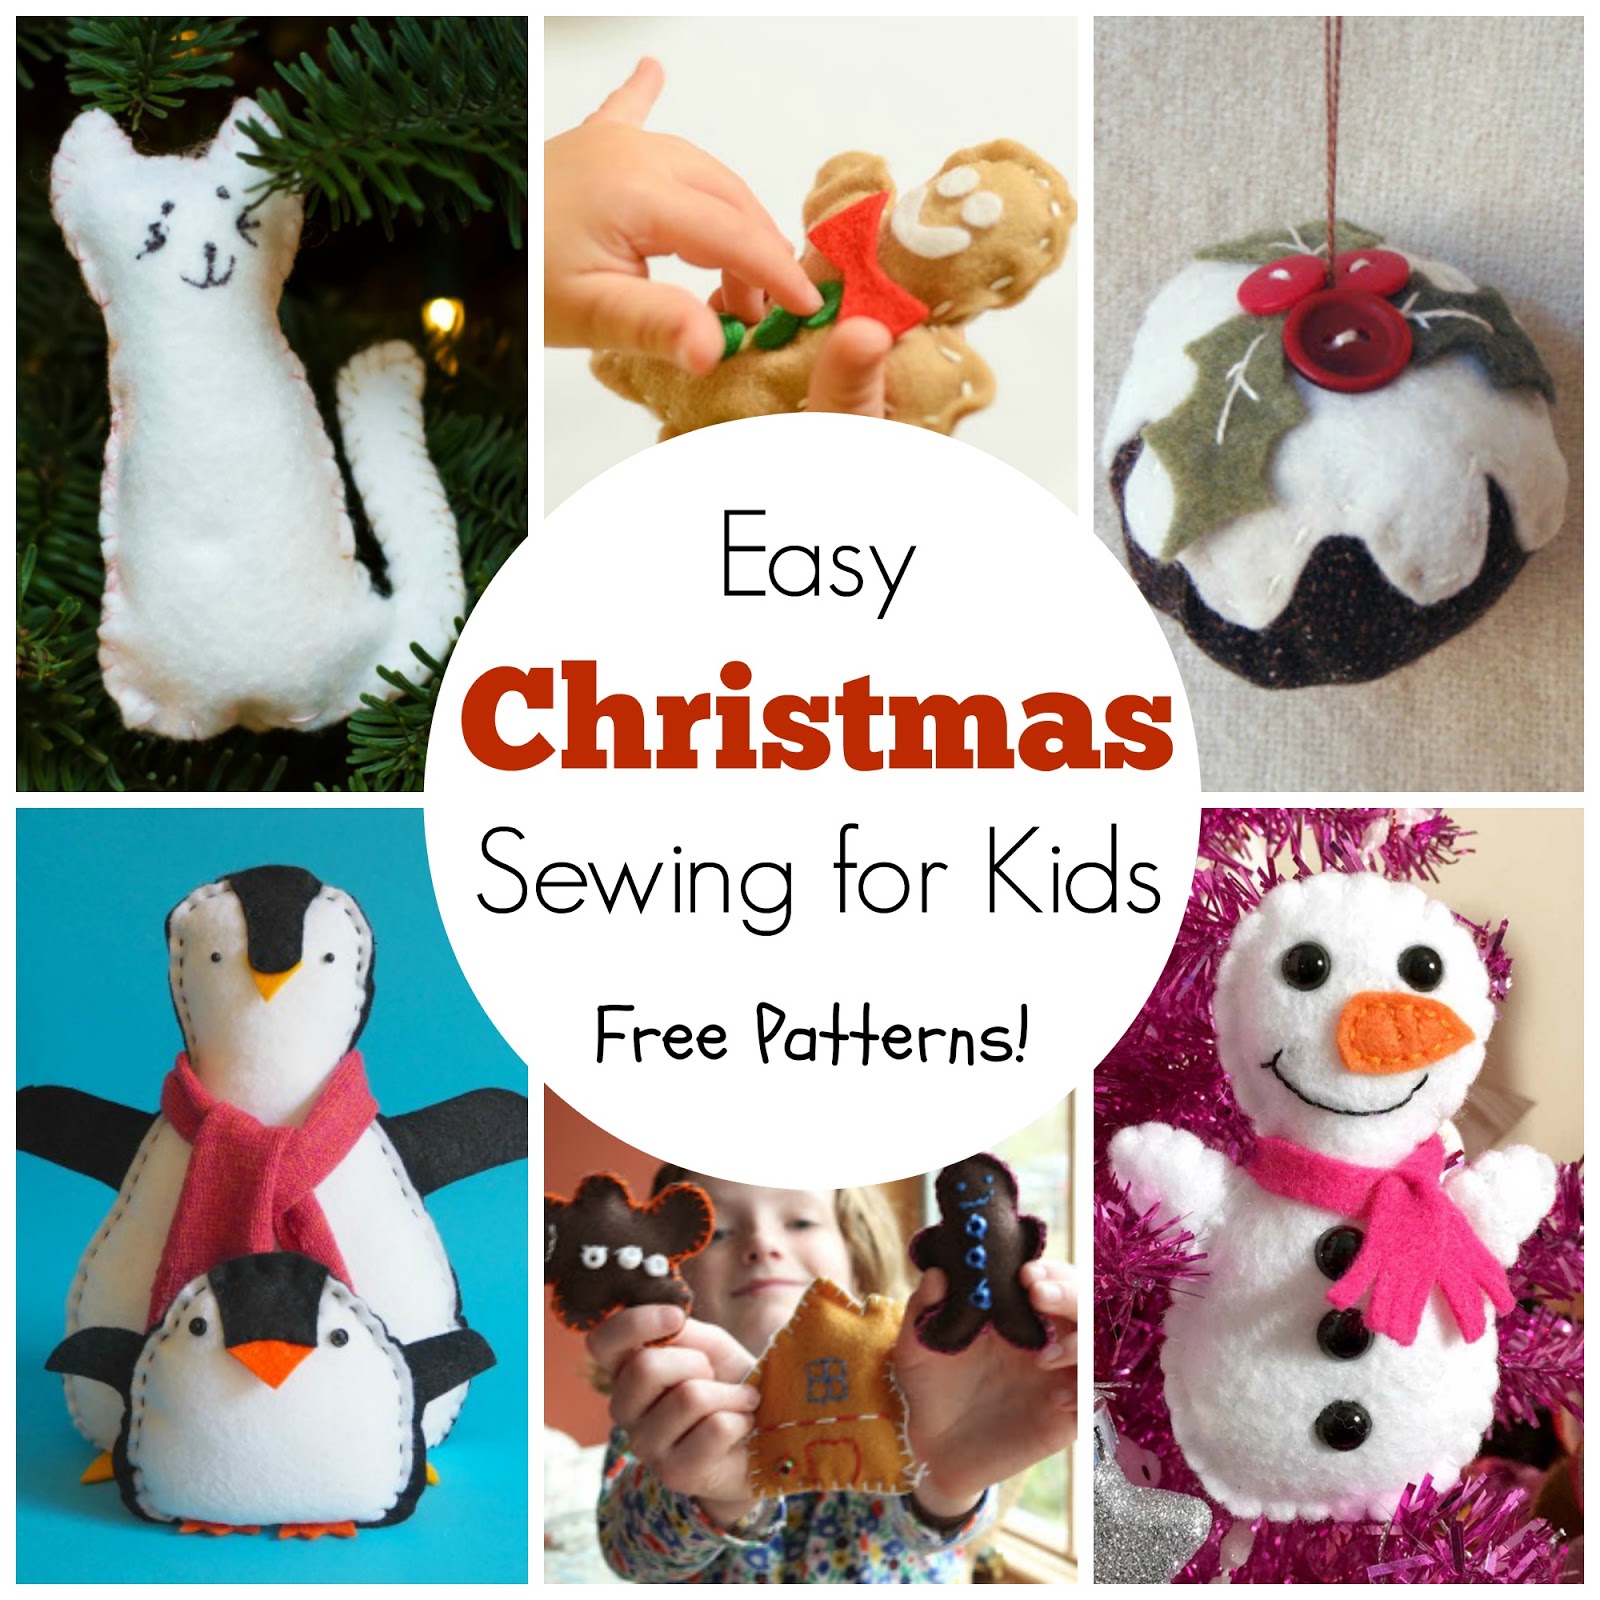 Sewing with Kids: 19 Free Kids Christmas Sewing Projects